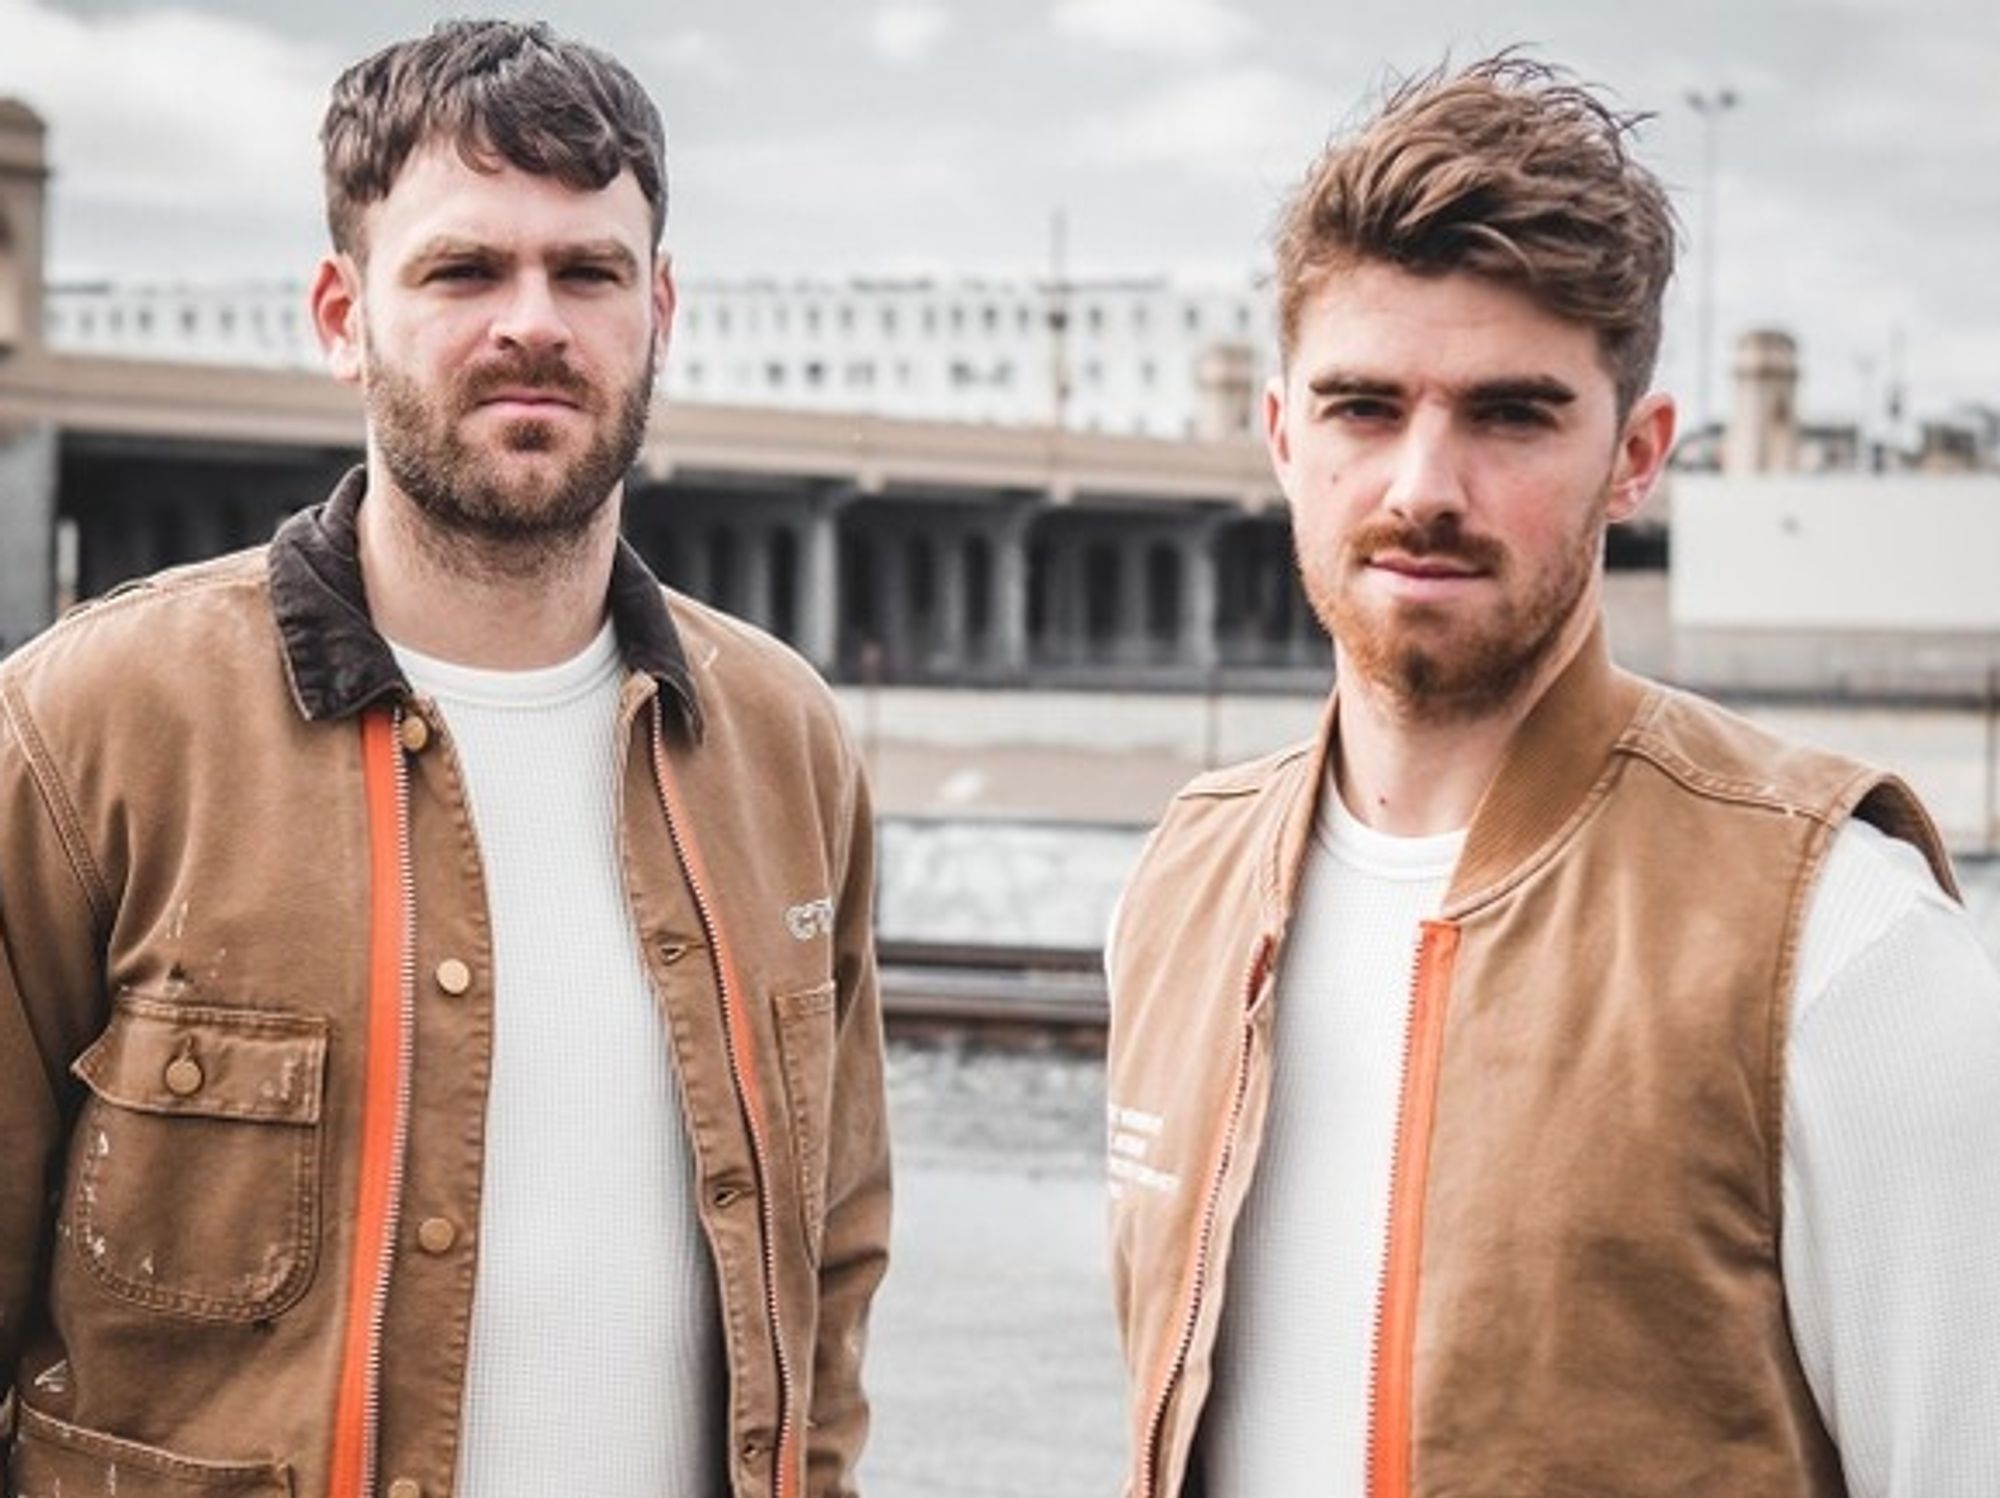 'There's a Real Energy in This City': The Chainsmokers on LA's Tech Scene